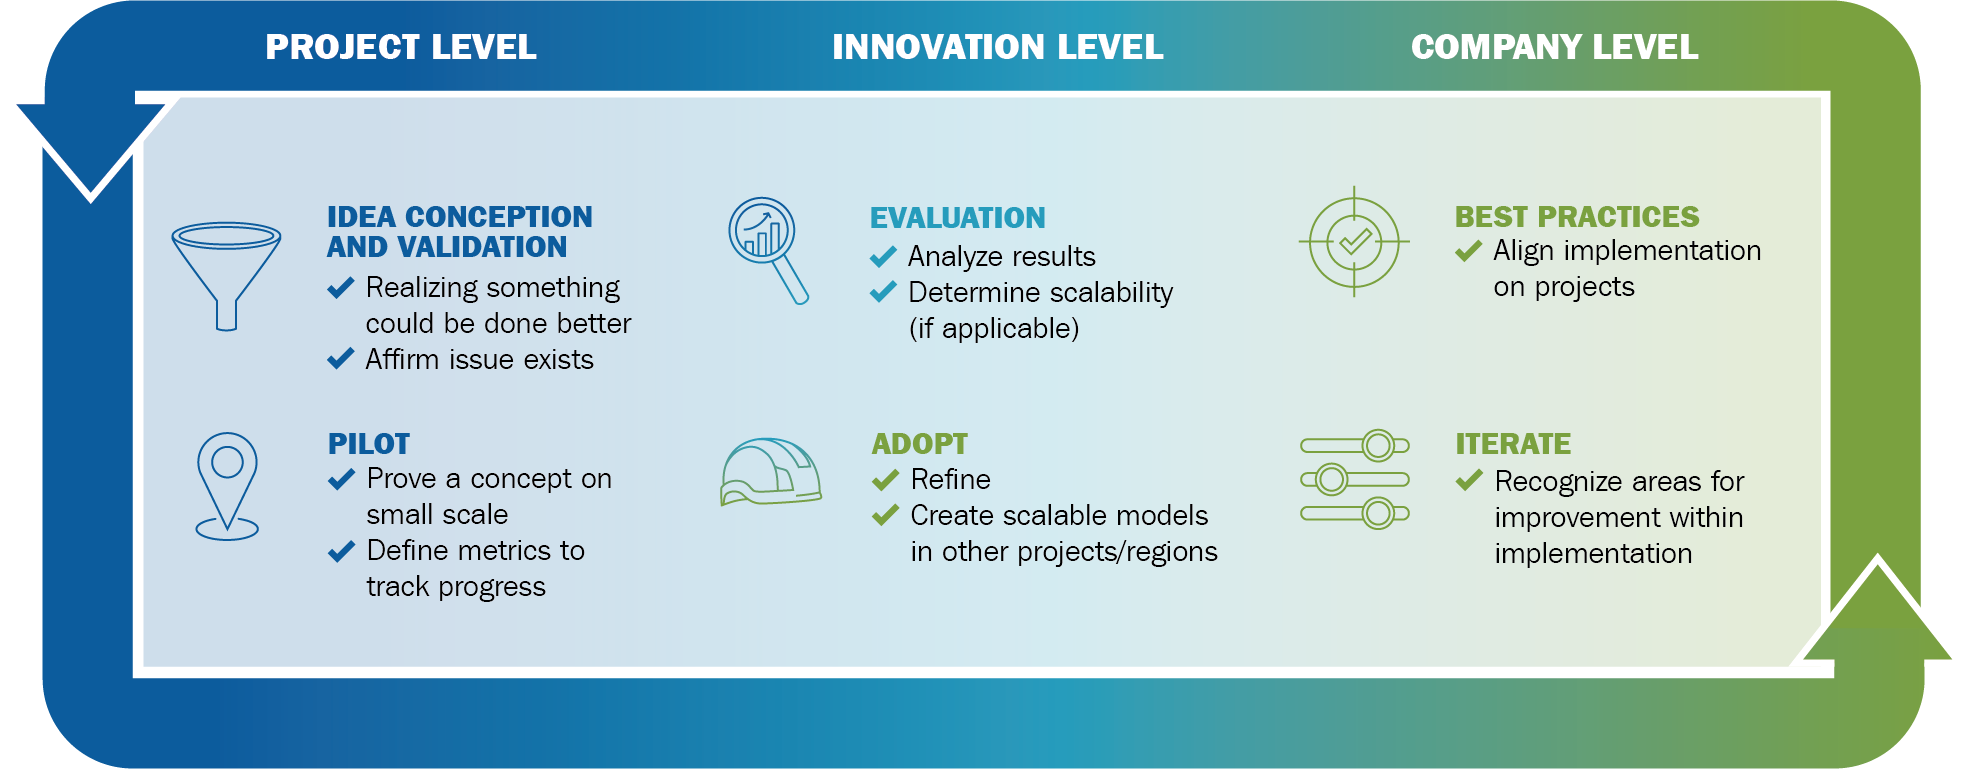 Innovation process infographic